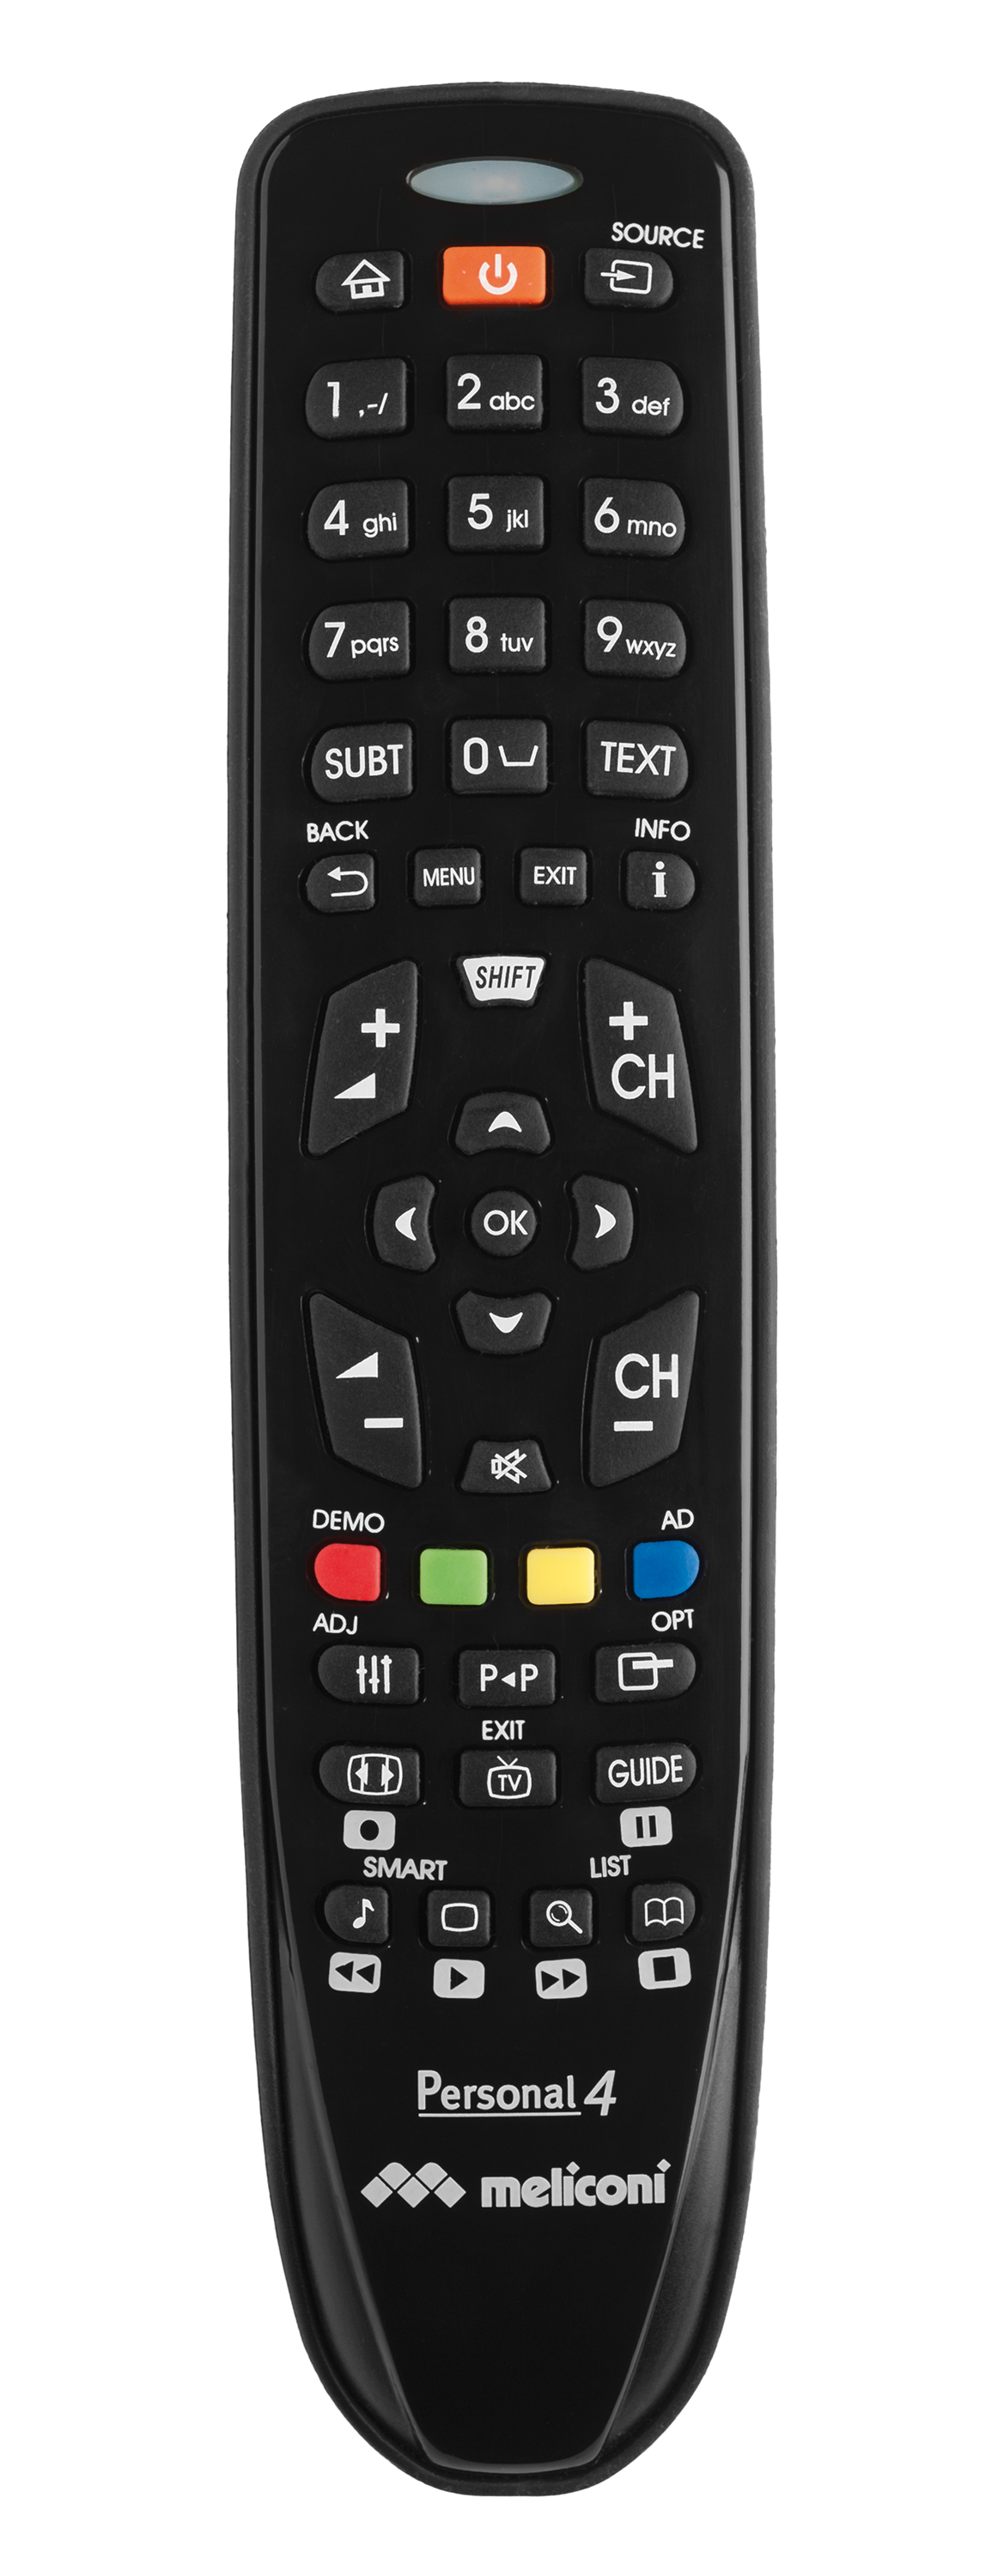 Gumbody personal 4, universal remote control Philips tv ready to use rubber